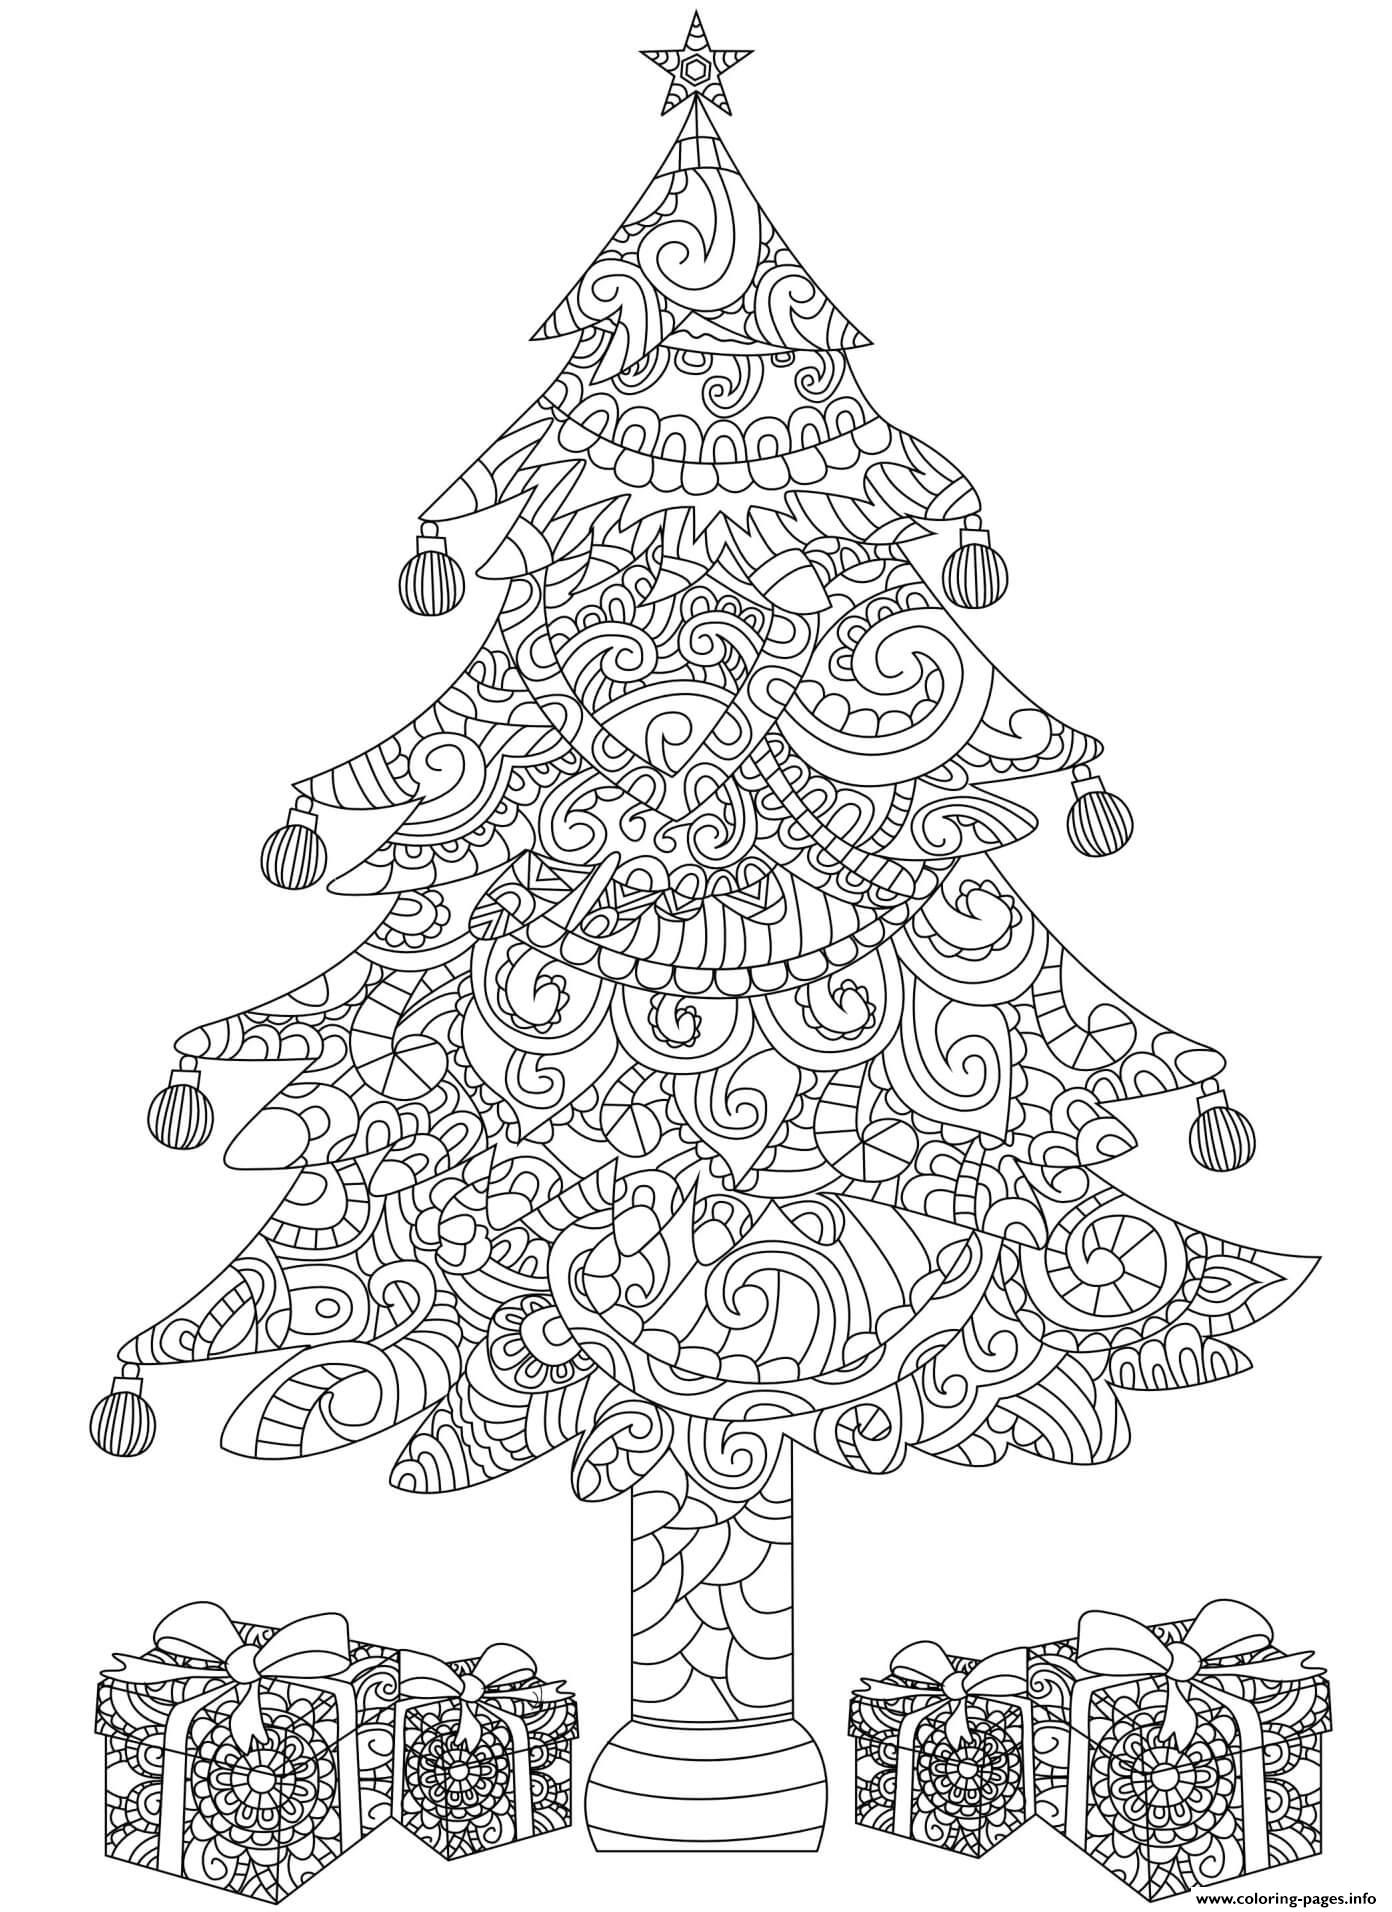 Christmas For Adults Decorated Tree With Wrapped Gifts Intricate Doodle coloring